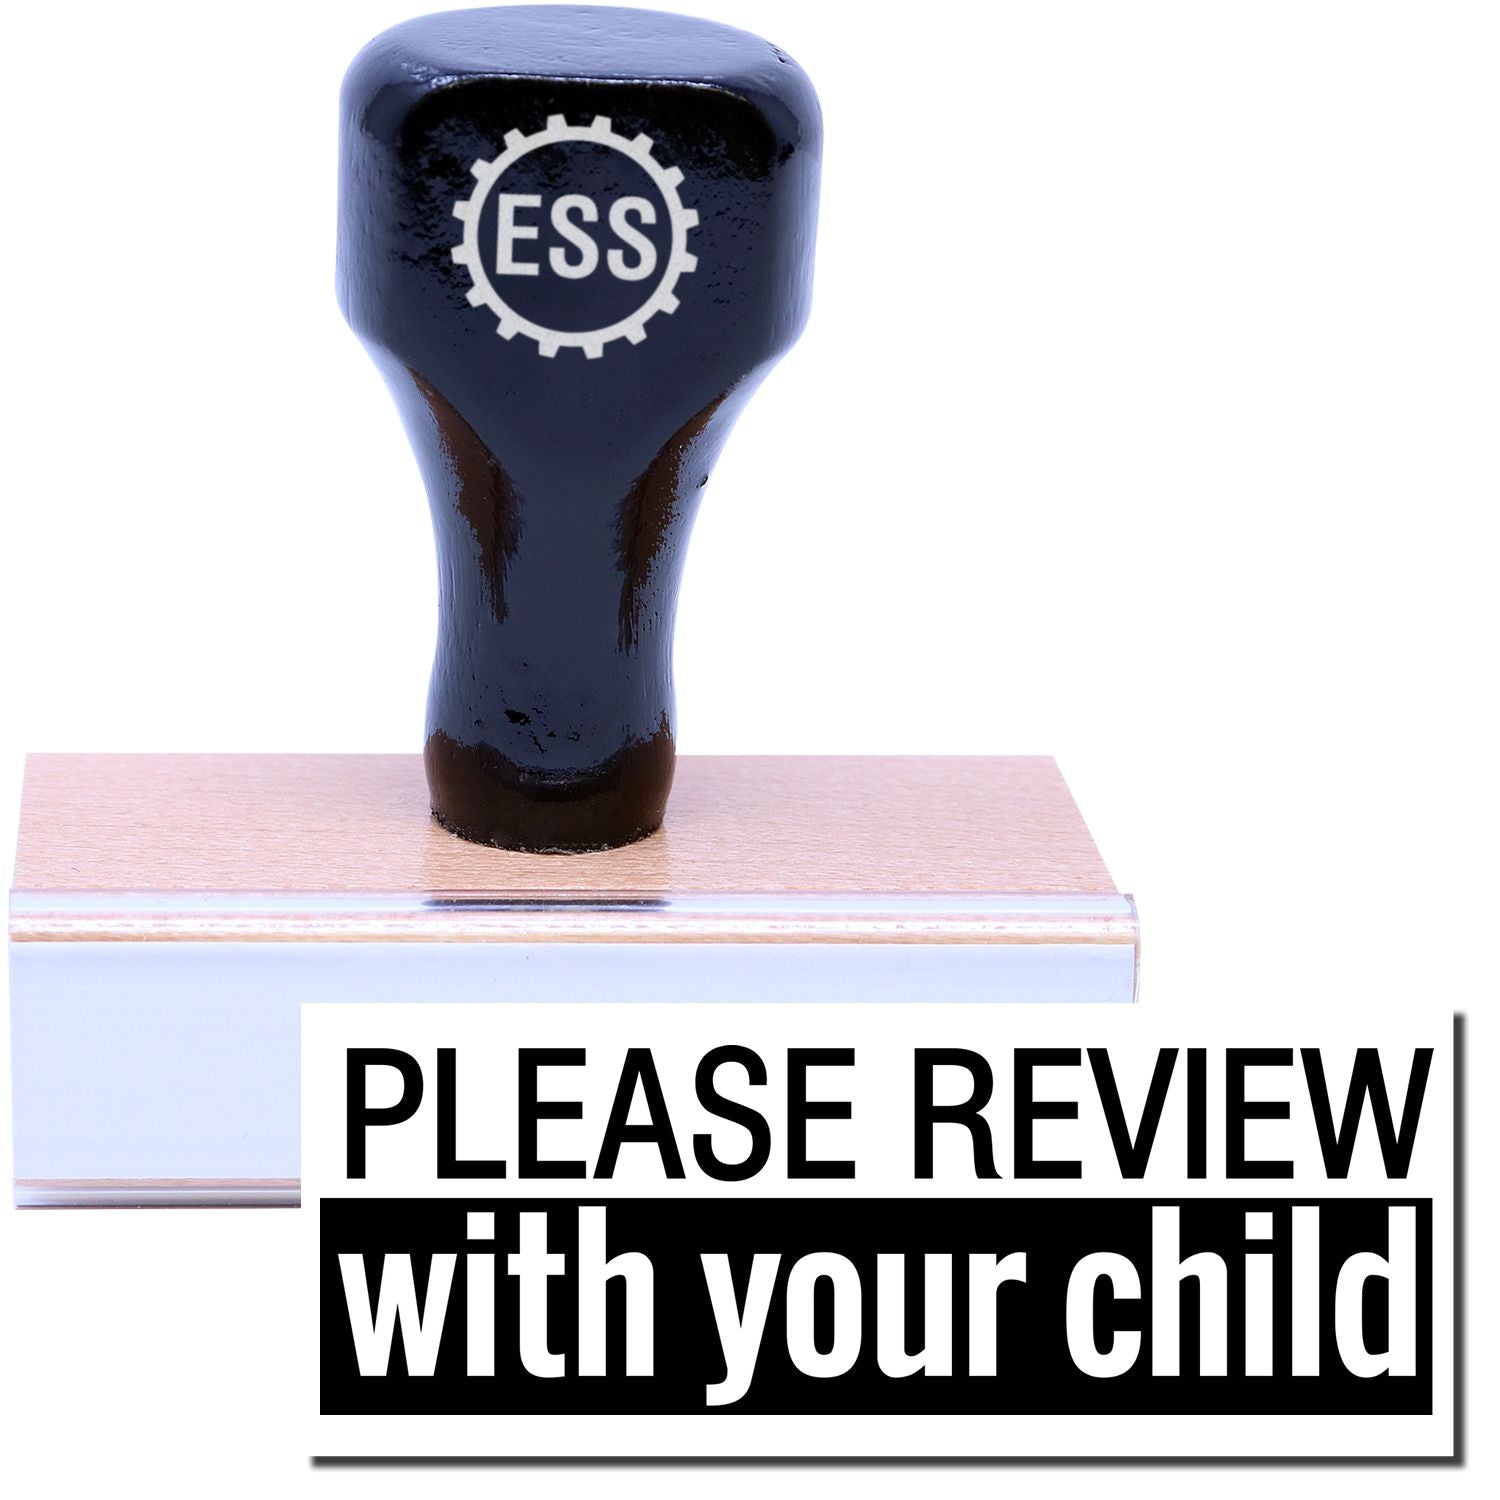 A stock office rubber stamp with a stamped image showing how the text "PLEASE REVIEW with your child" in a large font and in a two-color format is displayed after stamping.